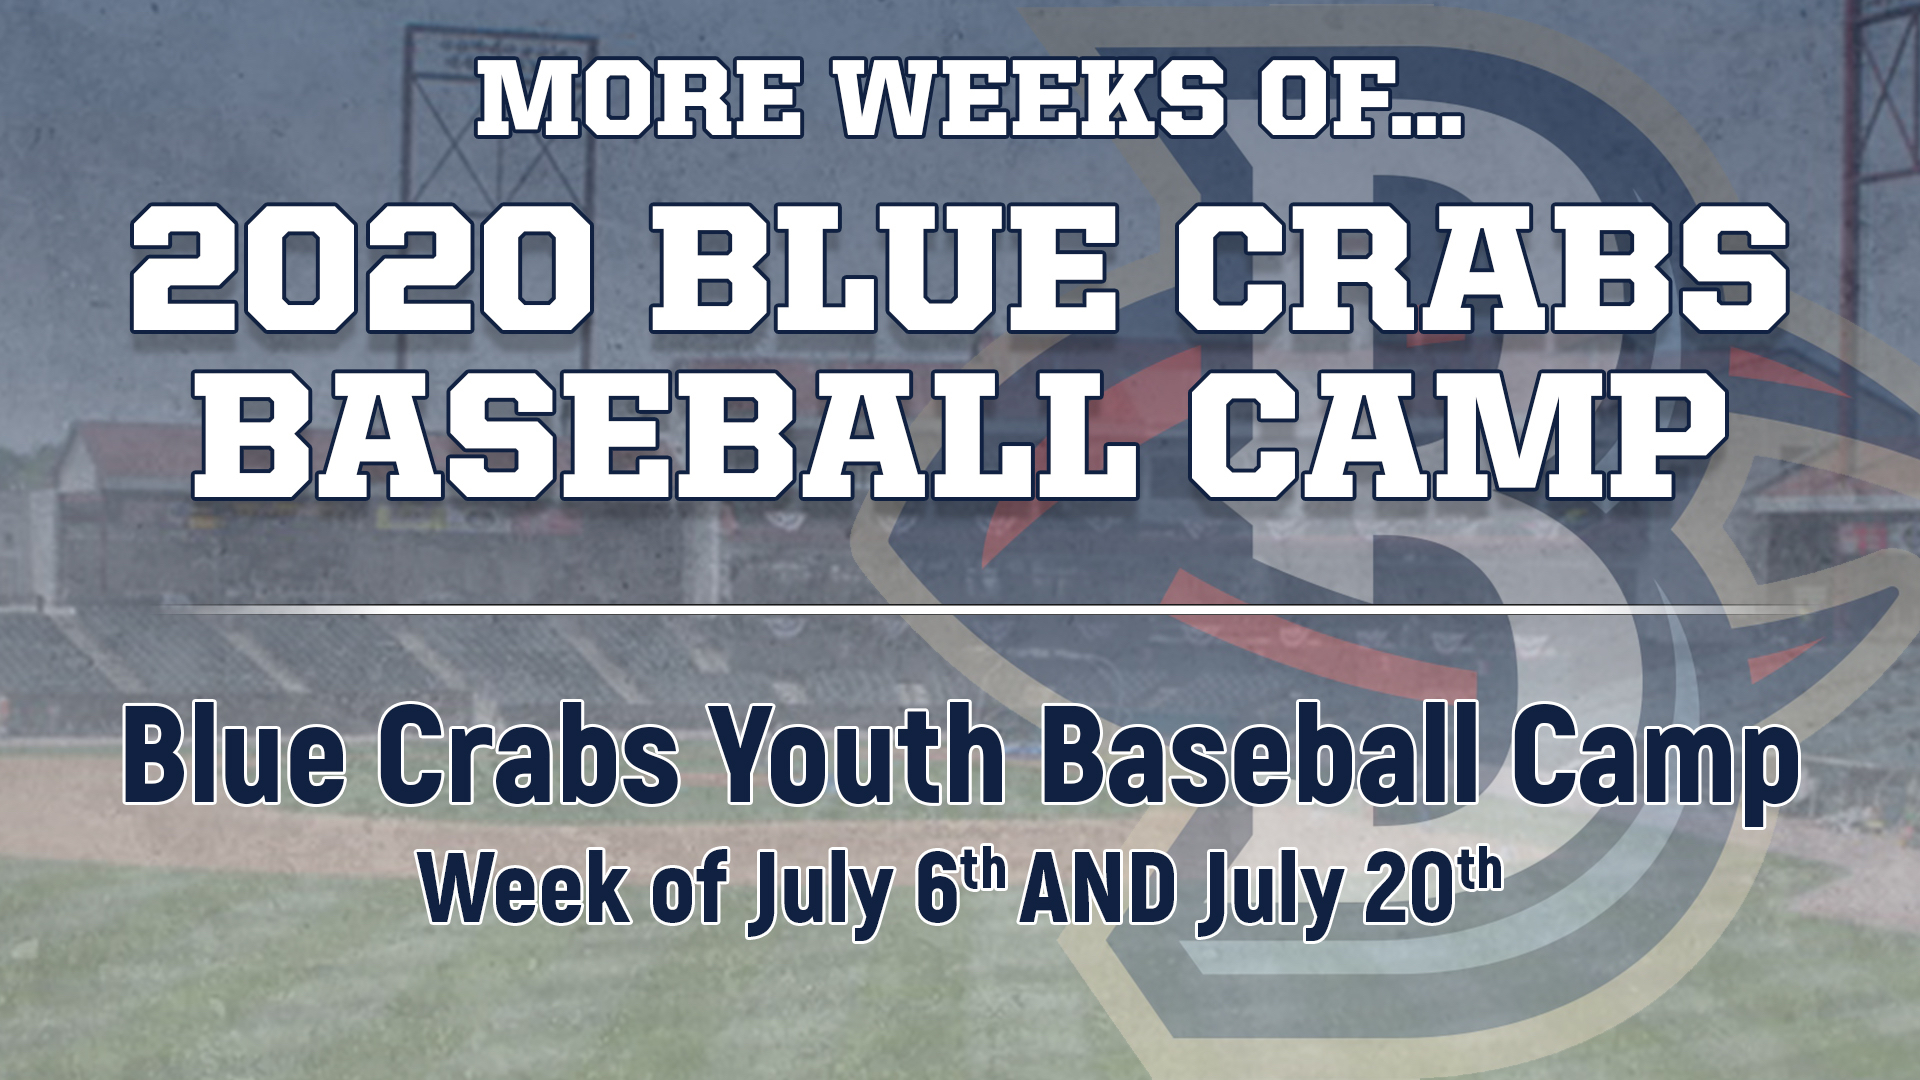 Blue Crabs To Host More Baseball Camps Coached By MLB Veterans